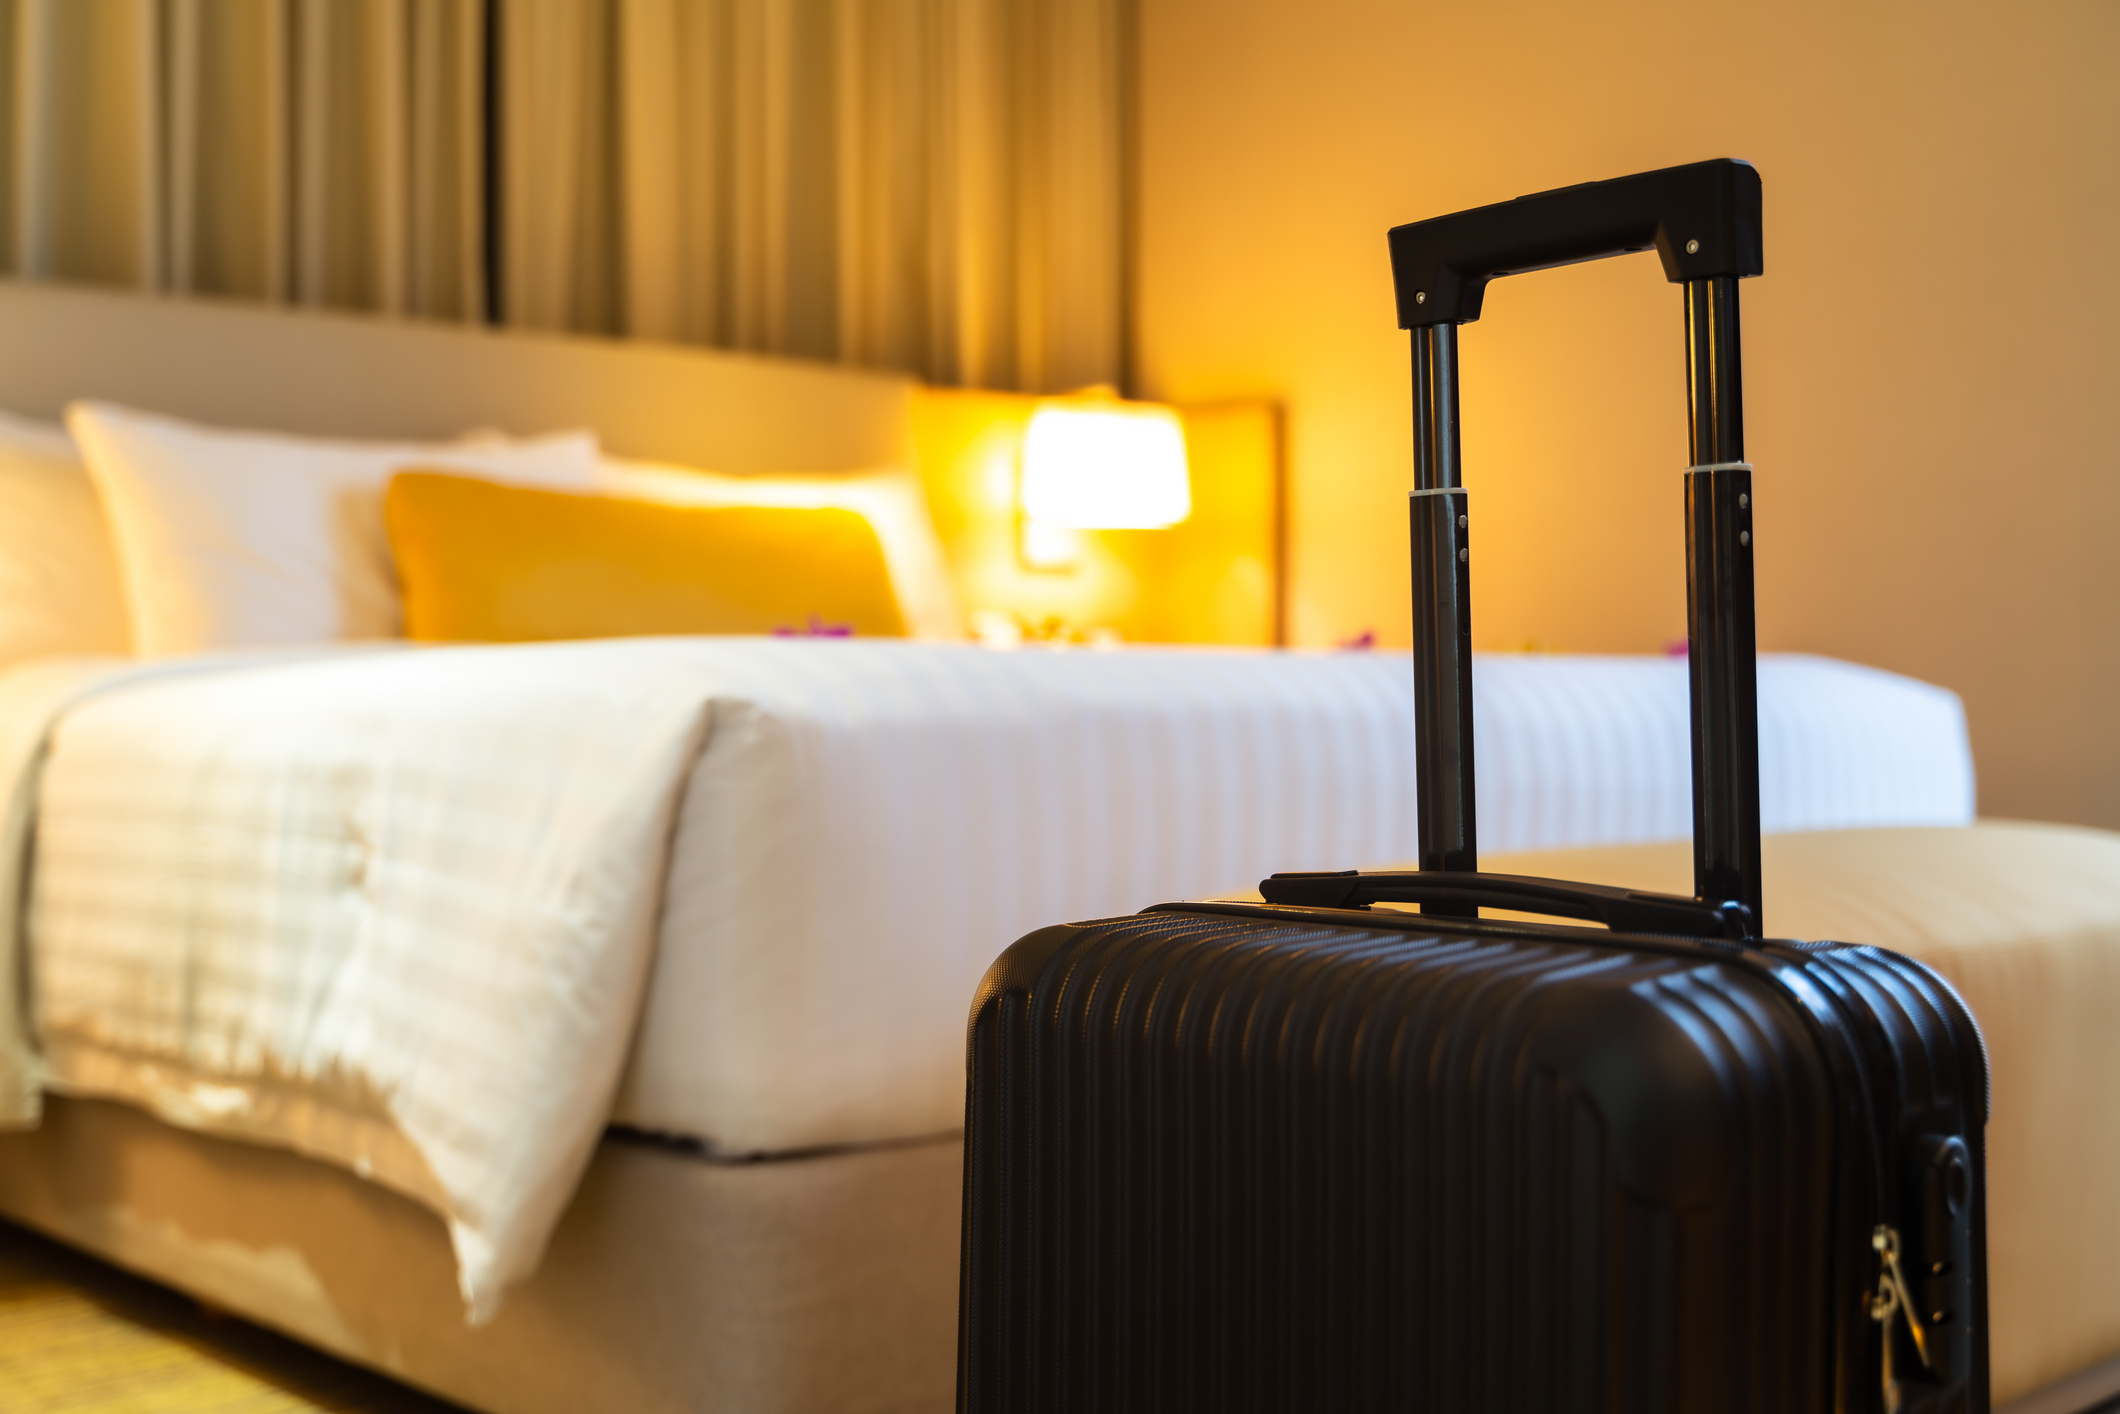 A suitcase in the foreground with an unfocused hotel room bed in the background, suggesting travel for work